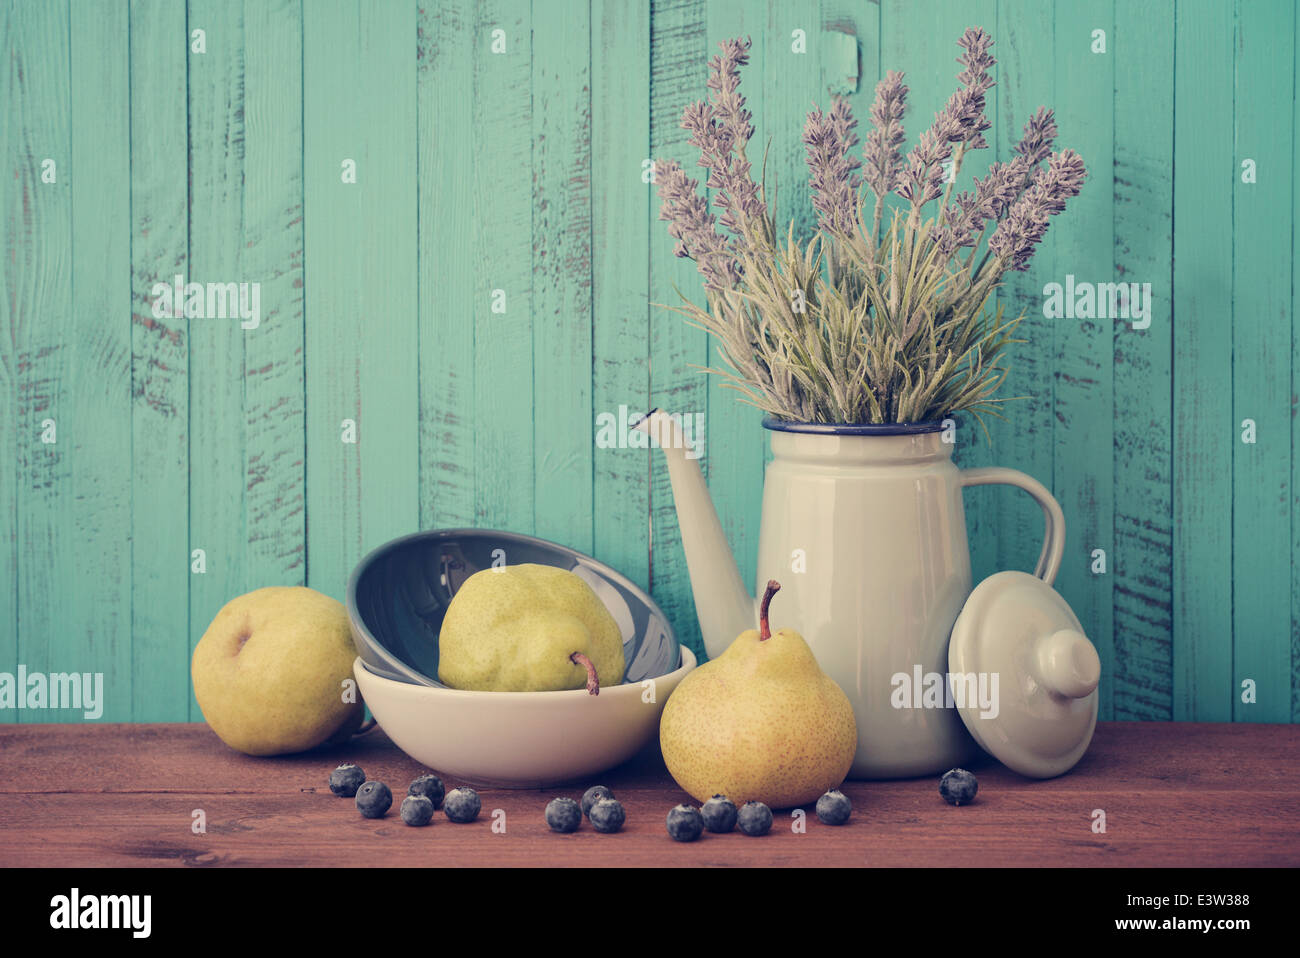 Pear in bowl with fresh blueberry and lavender flowers on wooden background Stock Photo